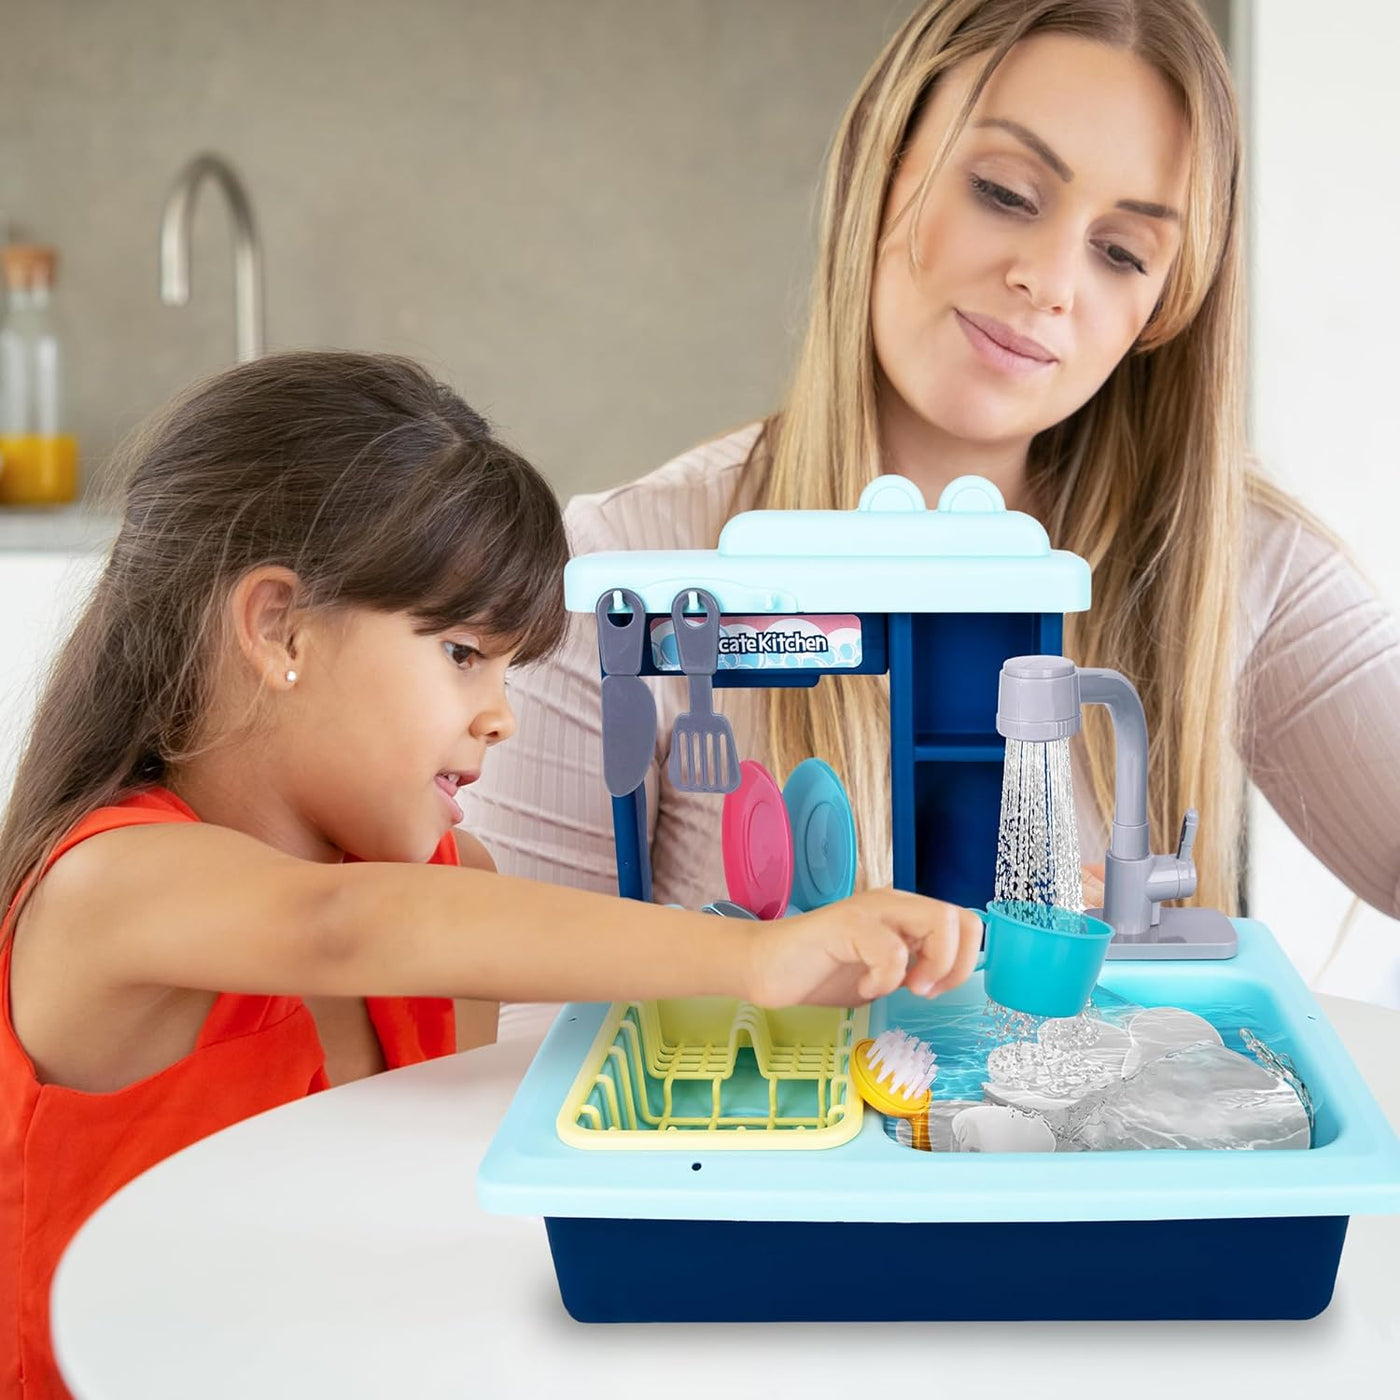 ArtCreativity Sink Toy with Running Water and Color Changing Dishes - 22 Piece Kids Kitchen Play Set - Pumps Real Water - Play Kitchen Sink with Drying Rack, Dishes, Toy Detergent Bottle - Ages 3 4 5